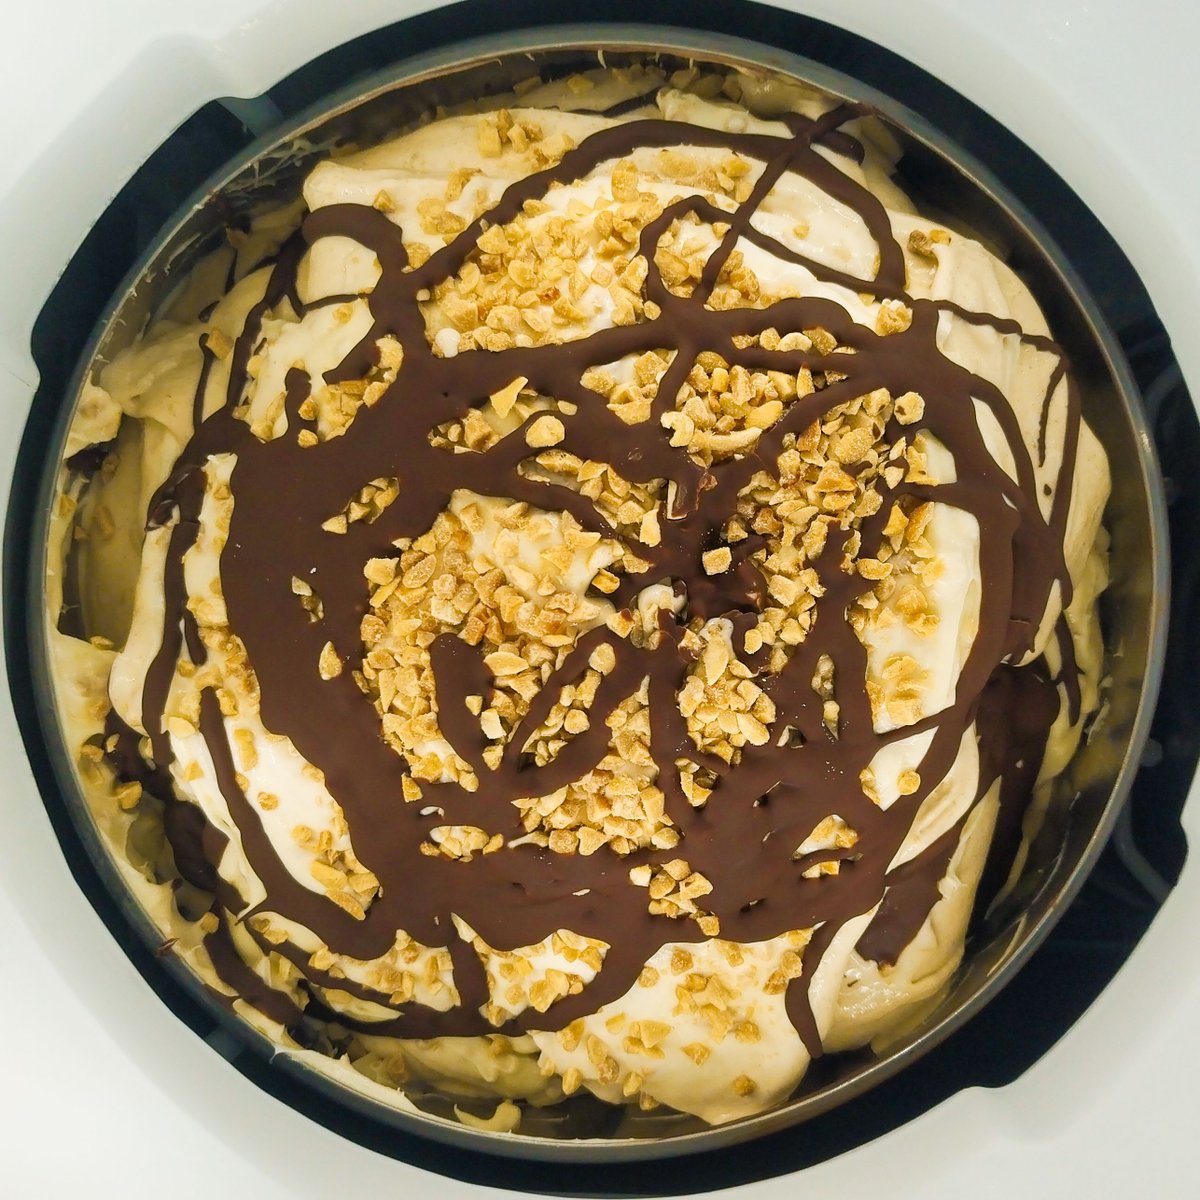 BANANA SPLIT - Banana gelato with whipped cream, crushed peanuts and chocolate chips. Do you find this appealing?